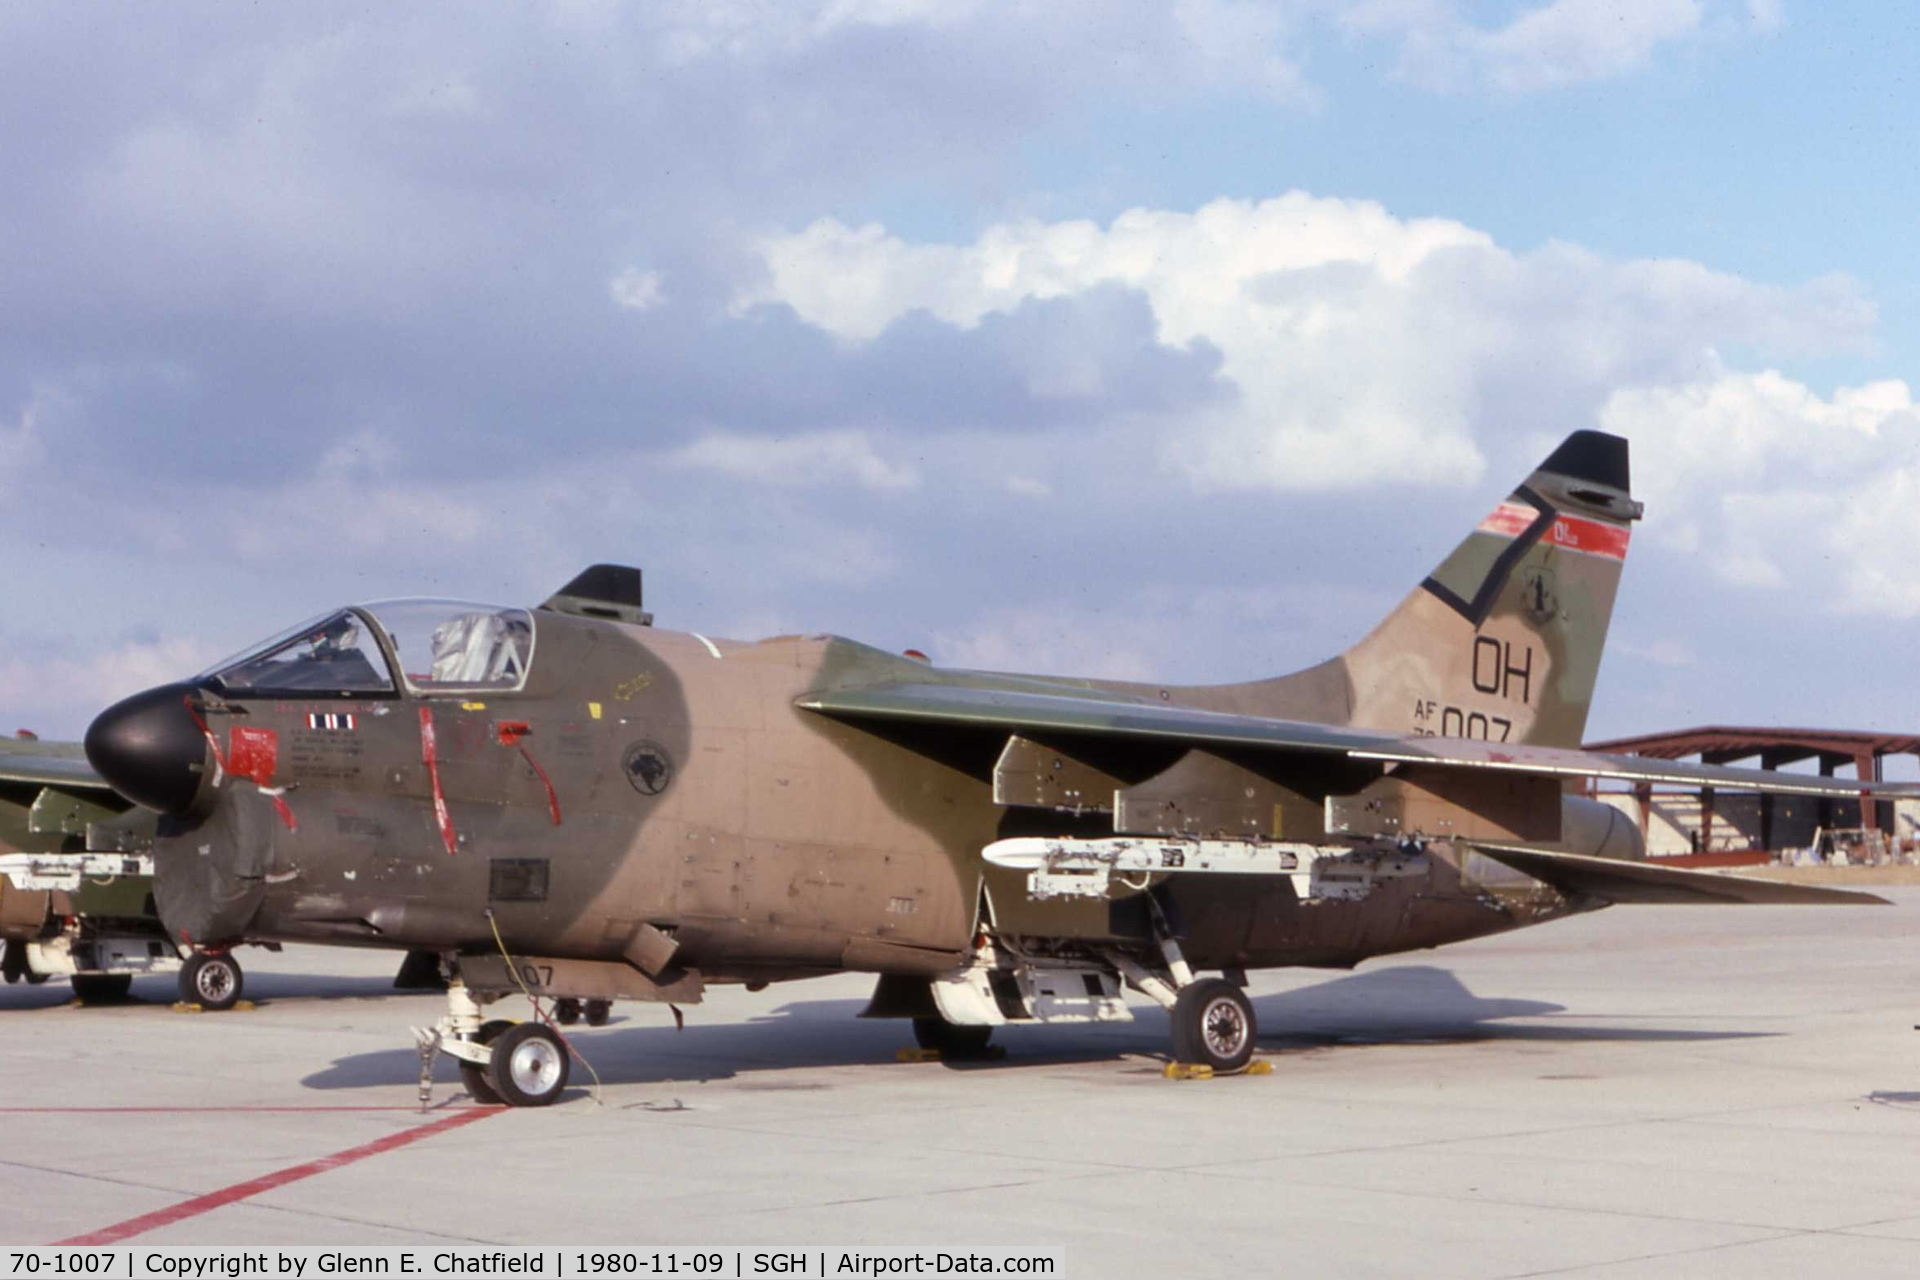 70-1007, 1970 LTV A-7D Corsair II C/N D-153, Parked on the ANG ramp